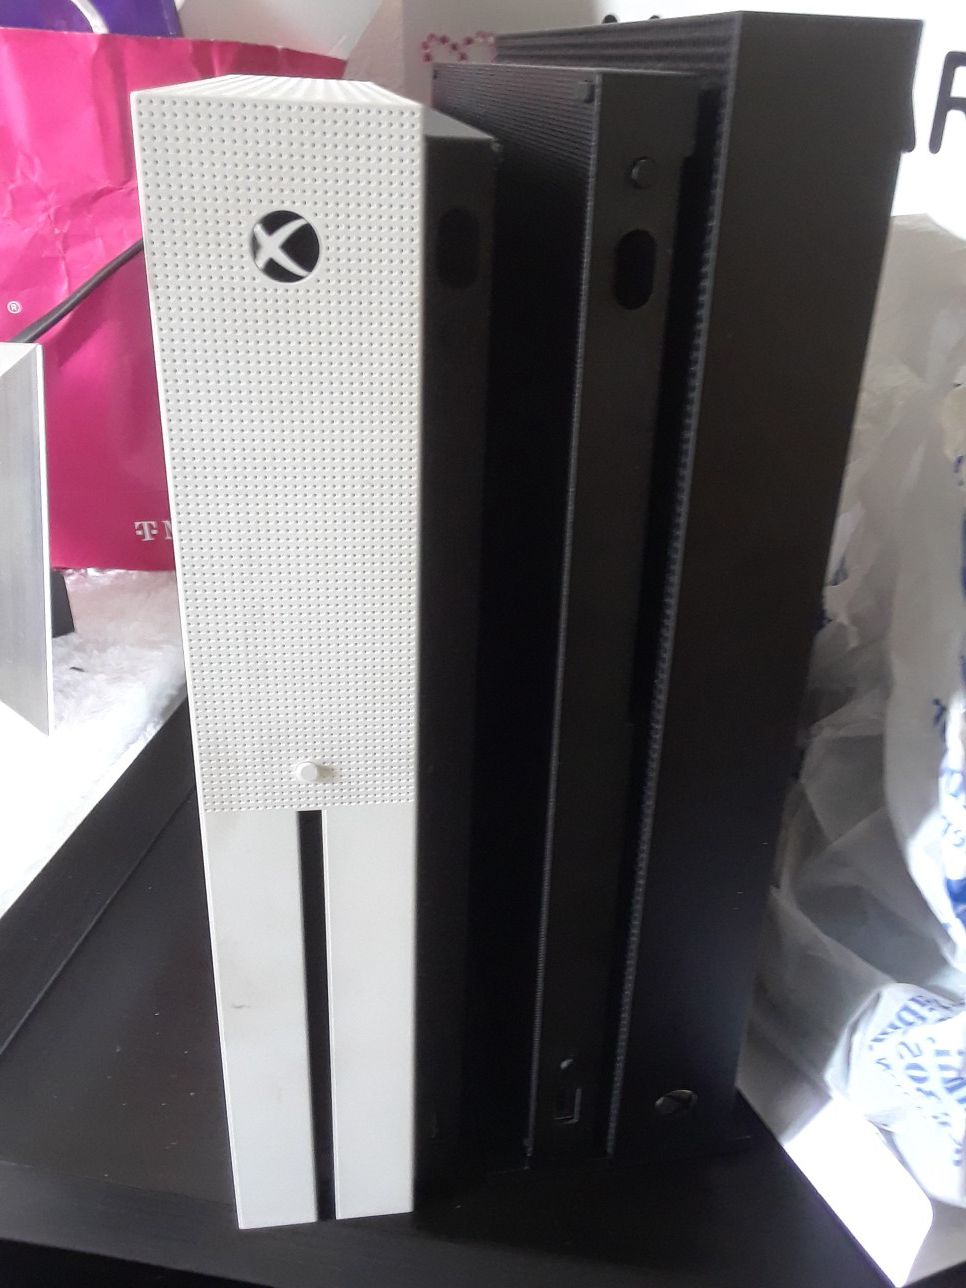 Xbox One S and Xbox One X